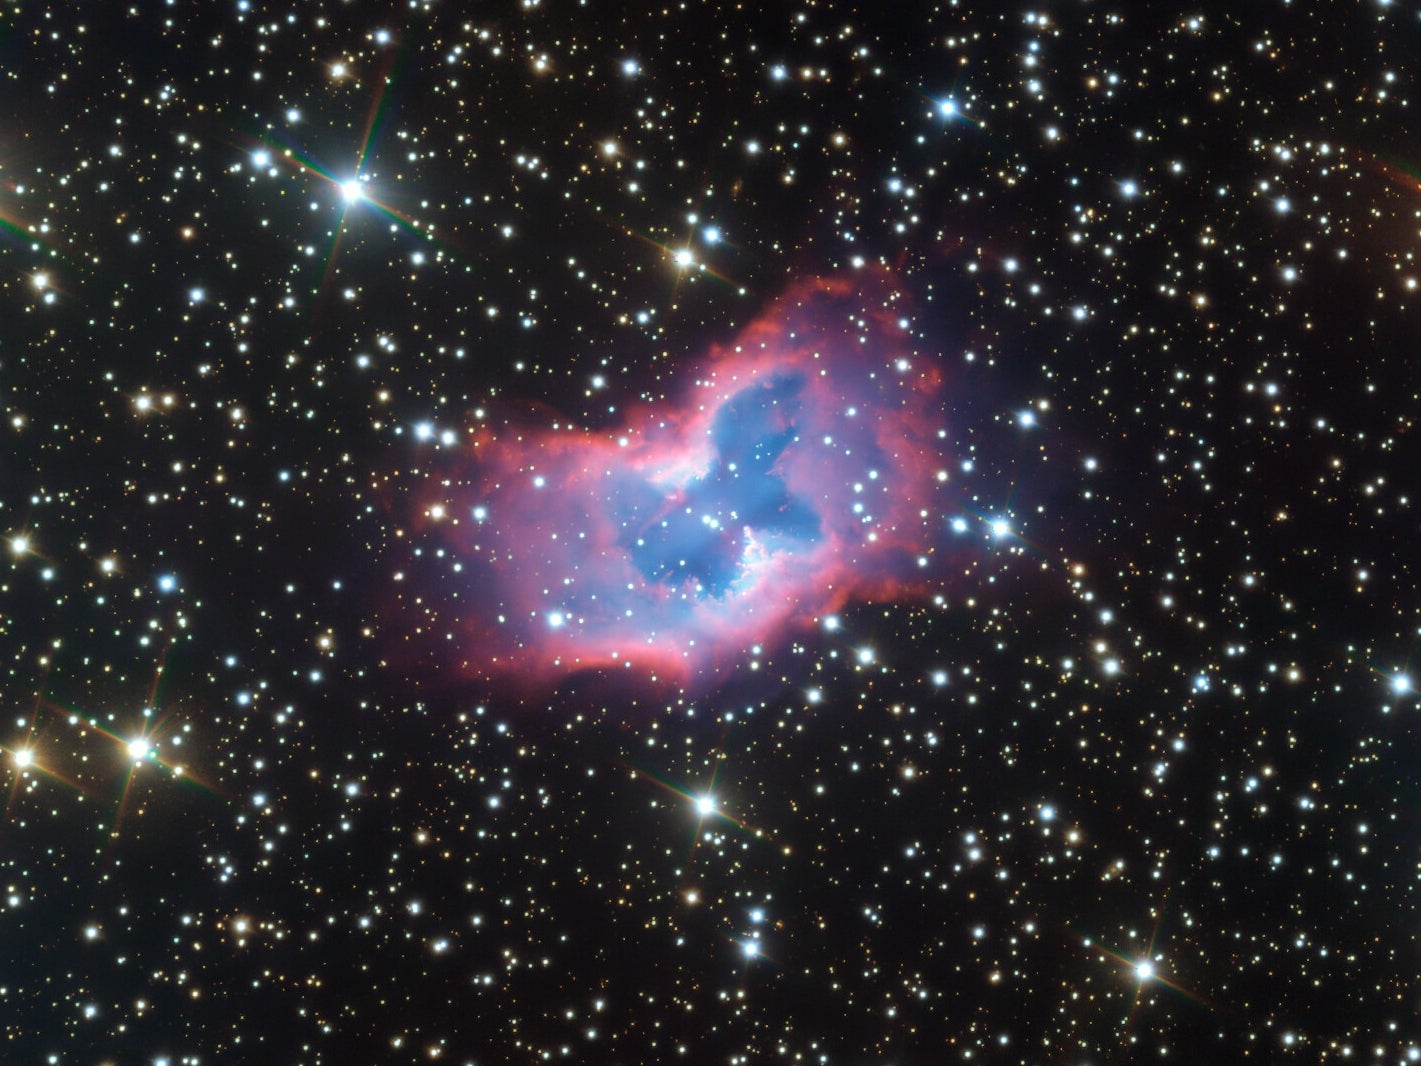 This highly detailed image of the fantastic NGC 2899 planetary nebula was captured using the FORS instrument on ESO’s Very Large Telescope in northern Chile.